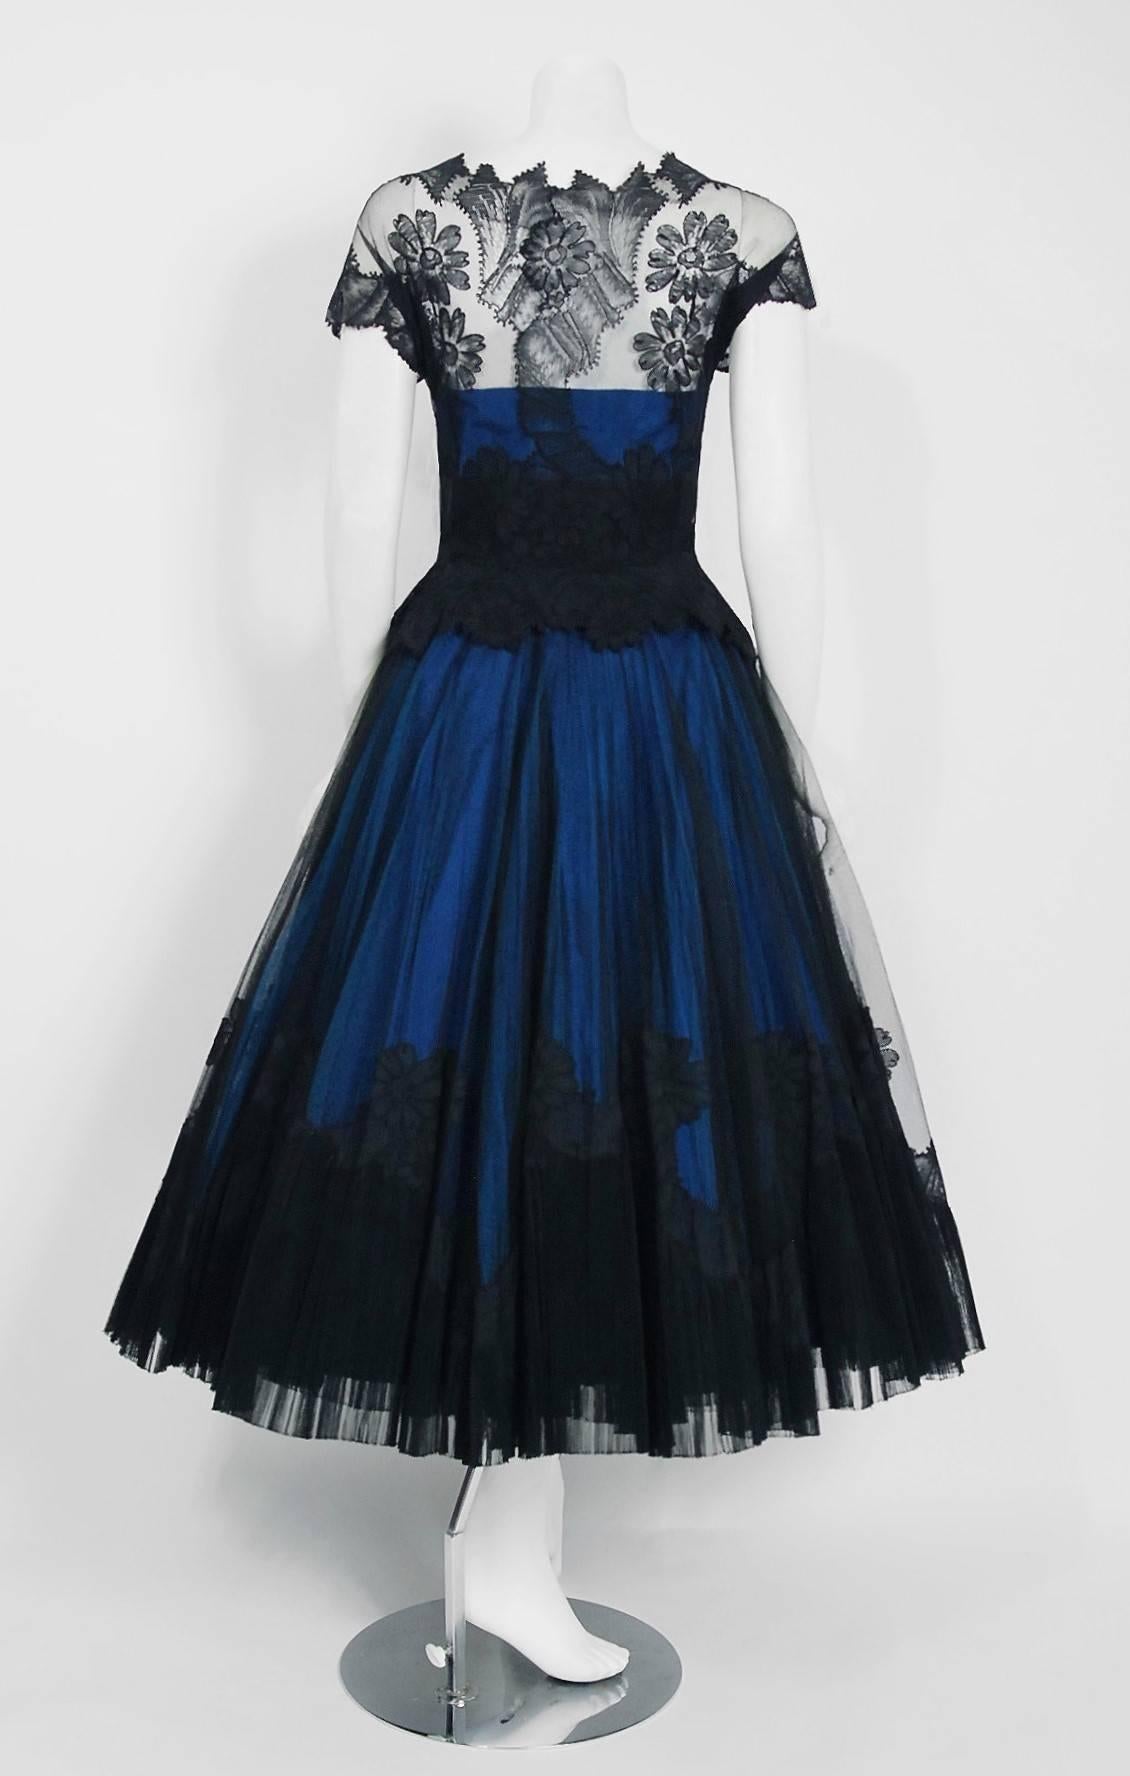 1955 Digby Morton Couture Black & Blue Floral Lace Illusion Pleated Party Dress 1